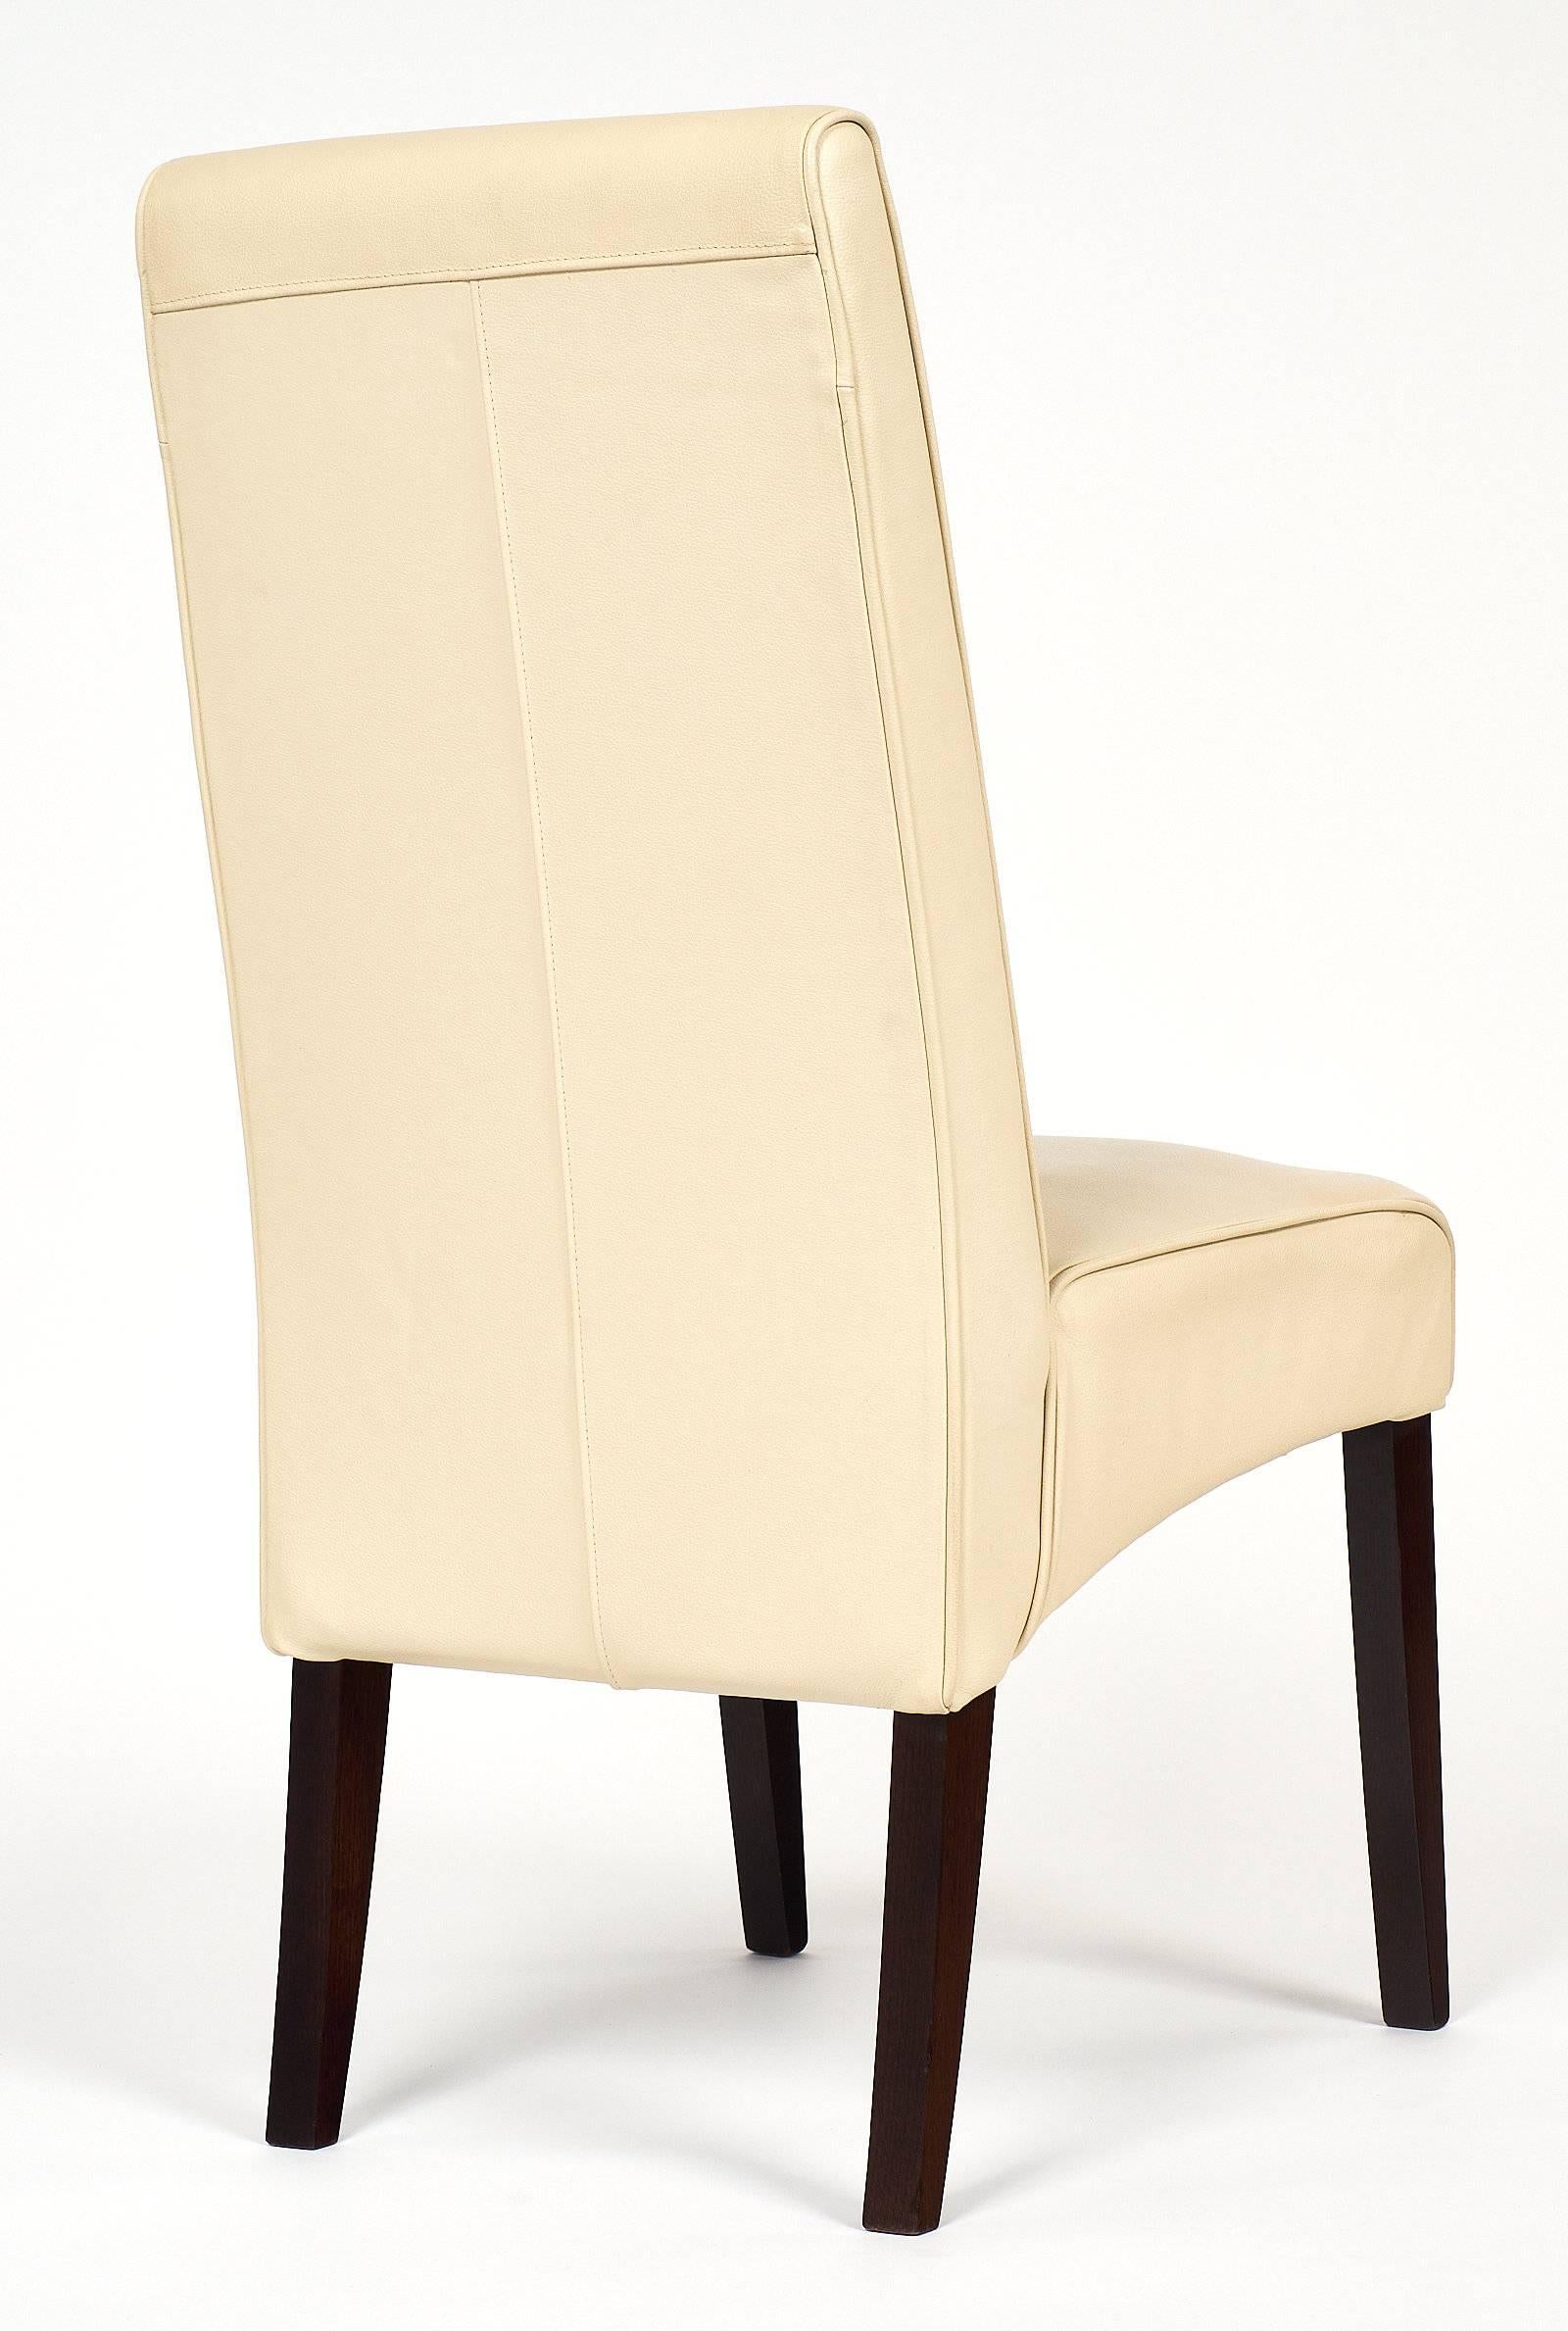 Late 20th Century Leather Italian Dining Chairs